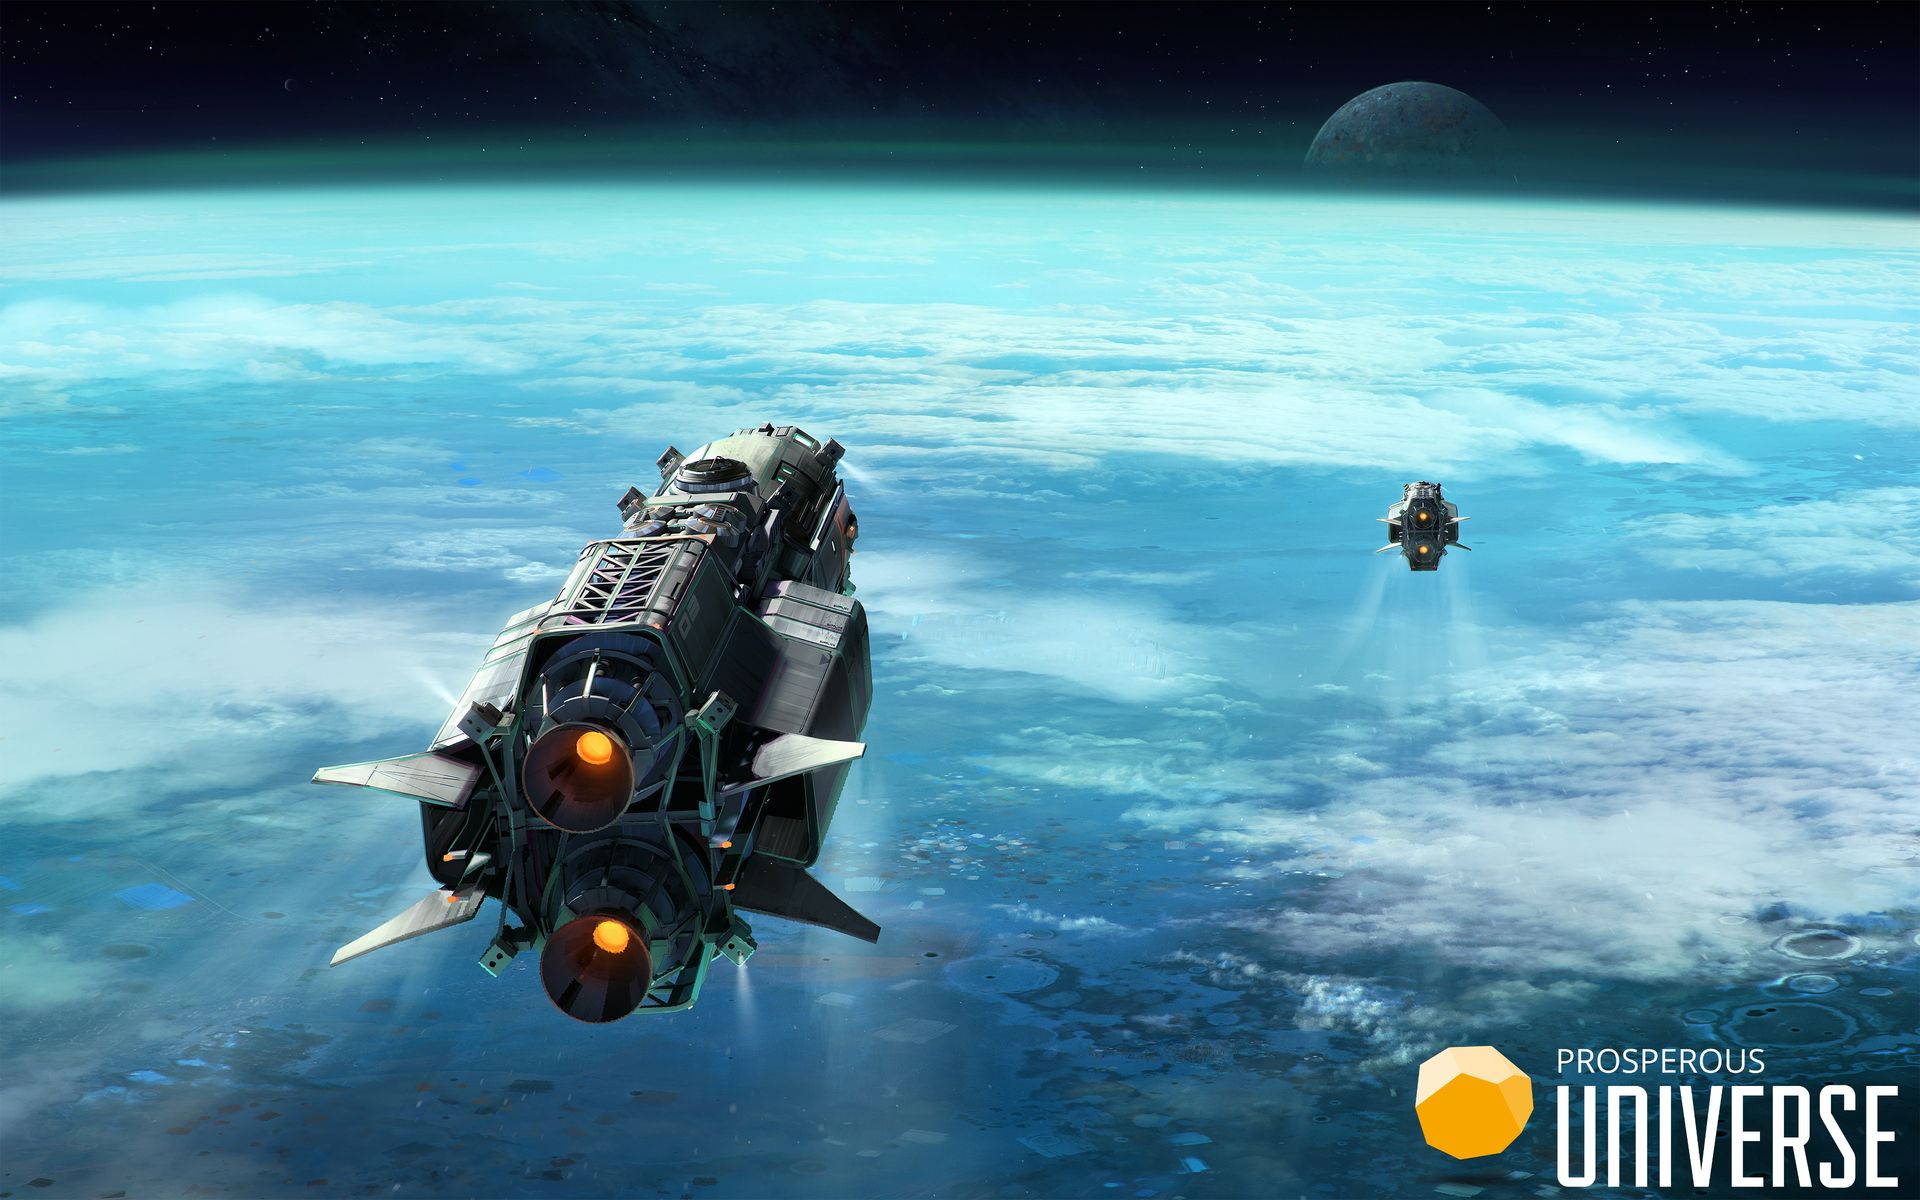 space simulator games for pc free download